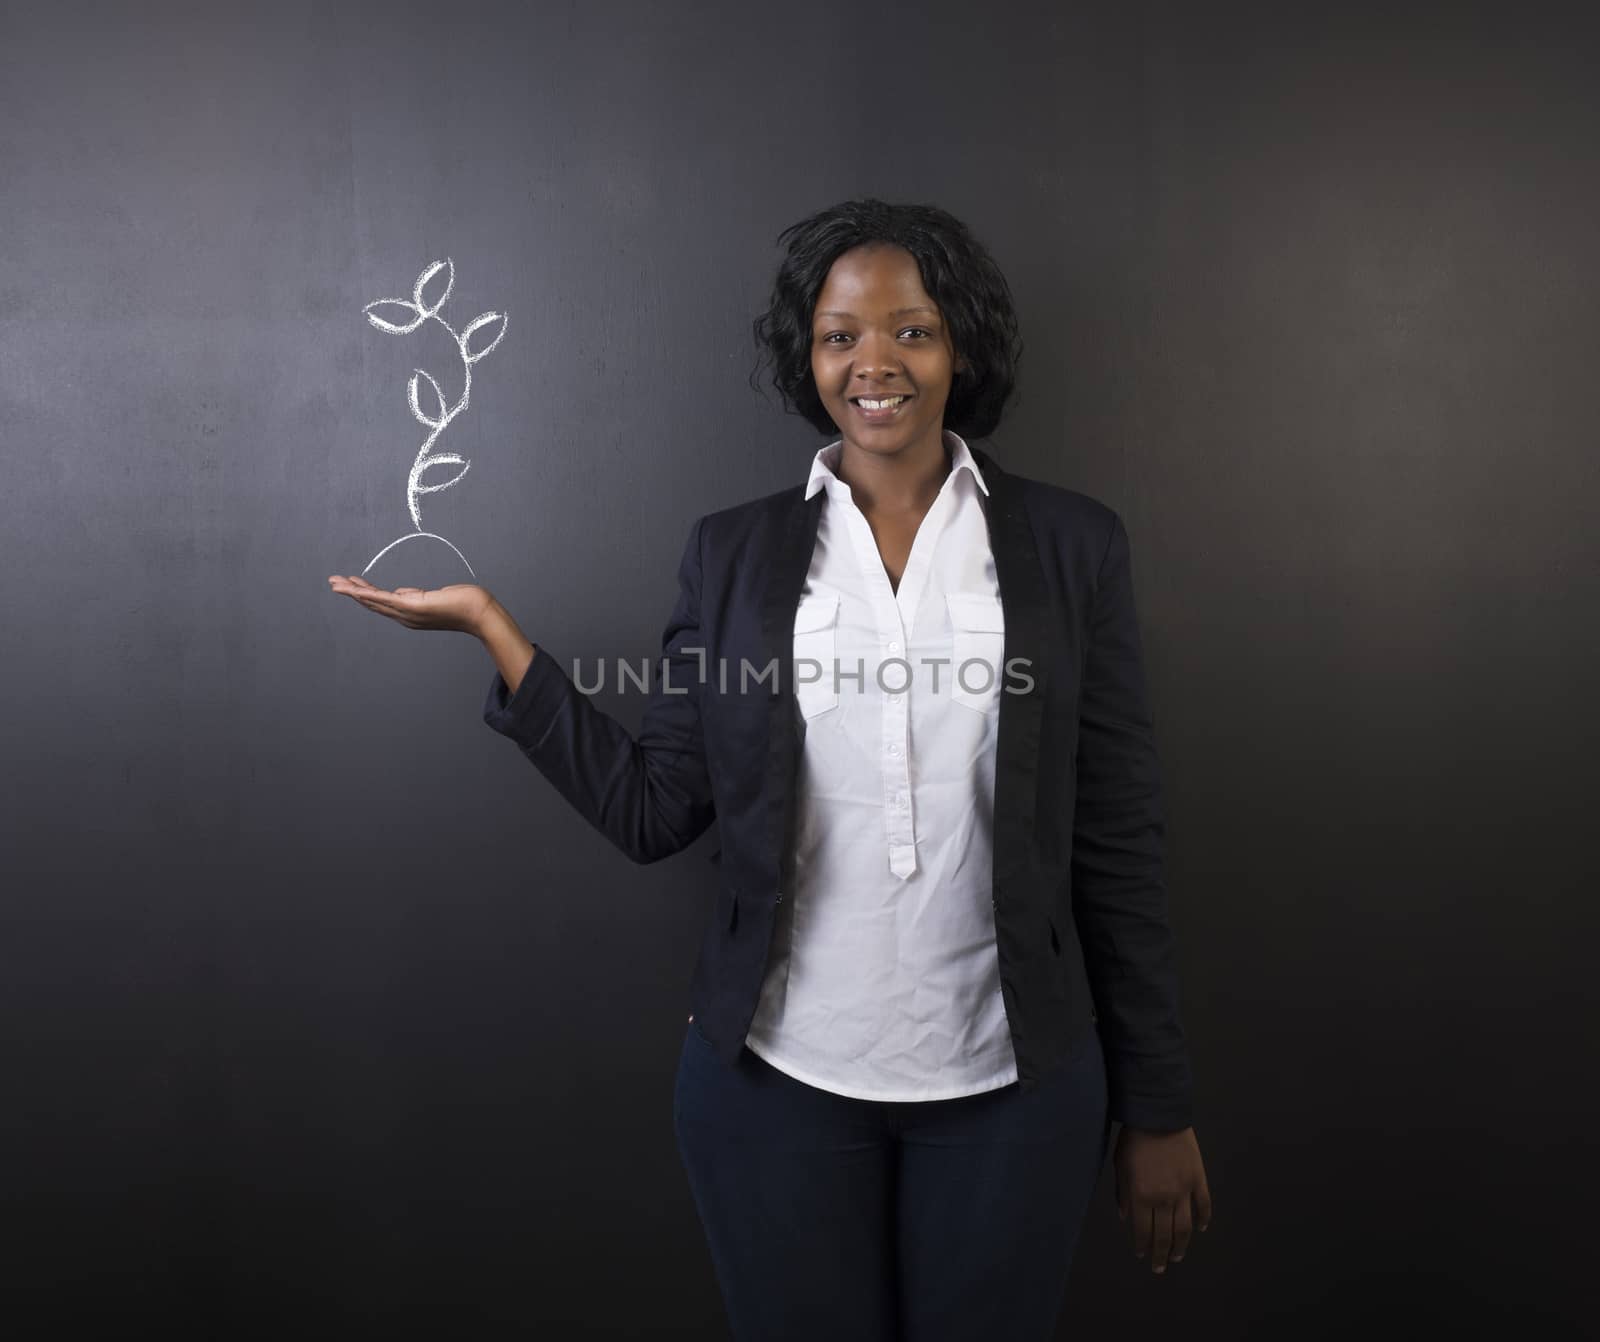 South African or African American woman teacher or student against blackboard holding chalk growng plant by alistaircotton